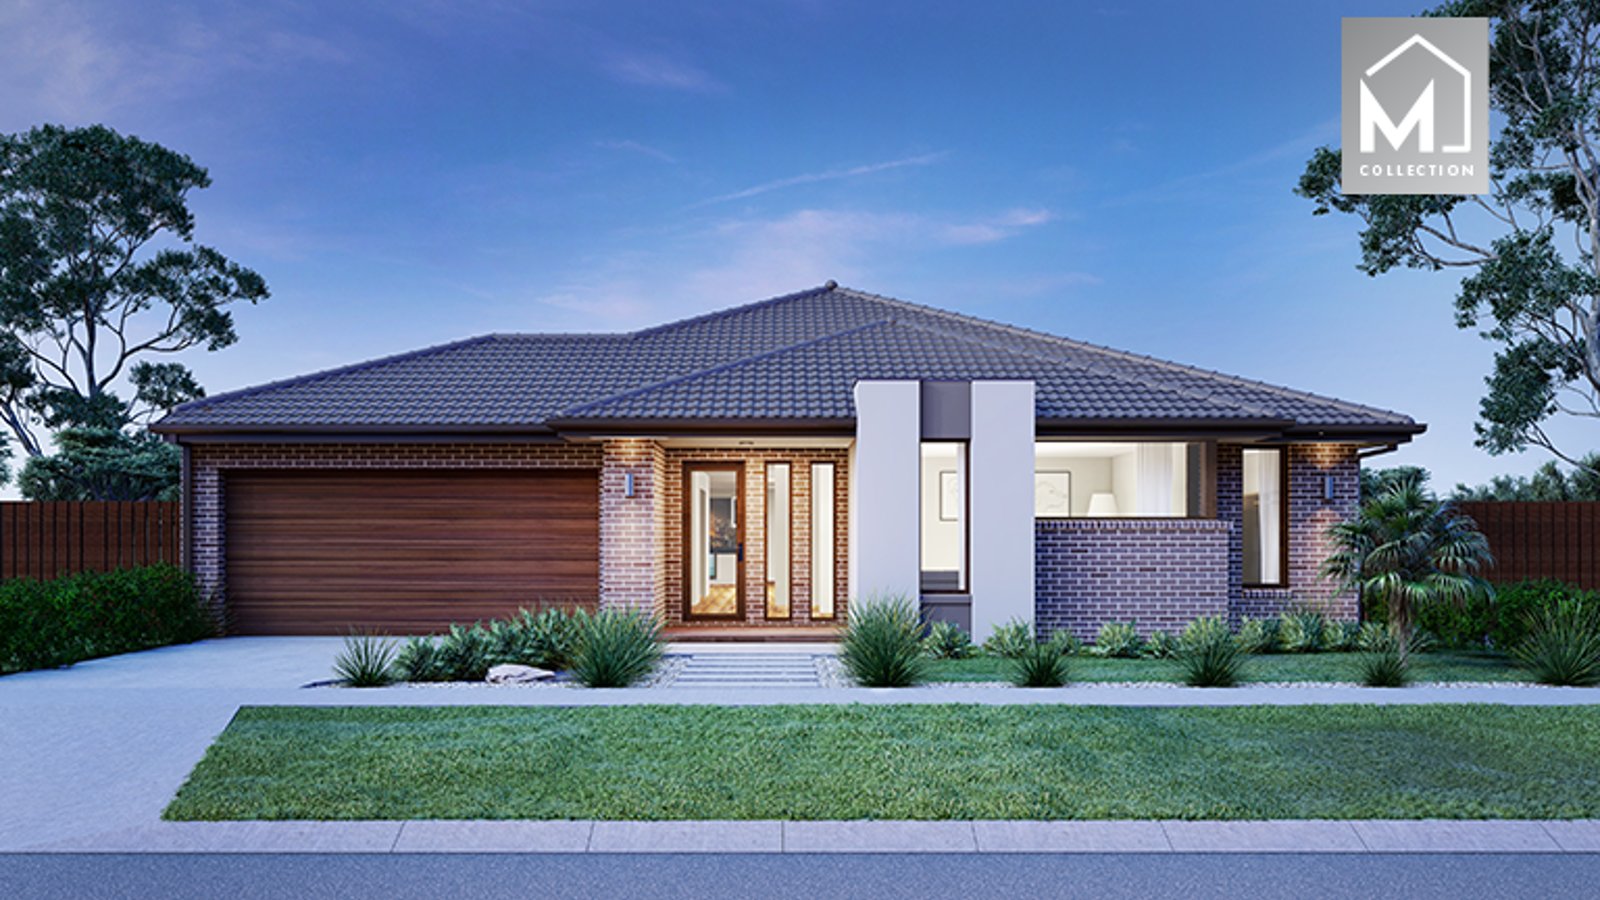 Photo of Lot 4220 Meridian Estate, Clyde North VIC 3978 AUS